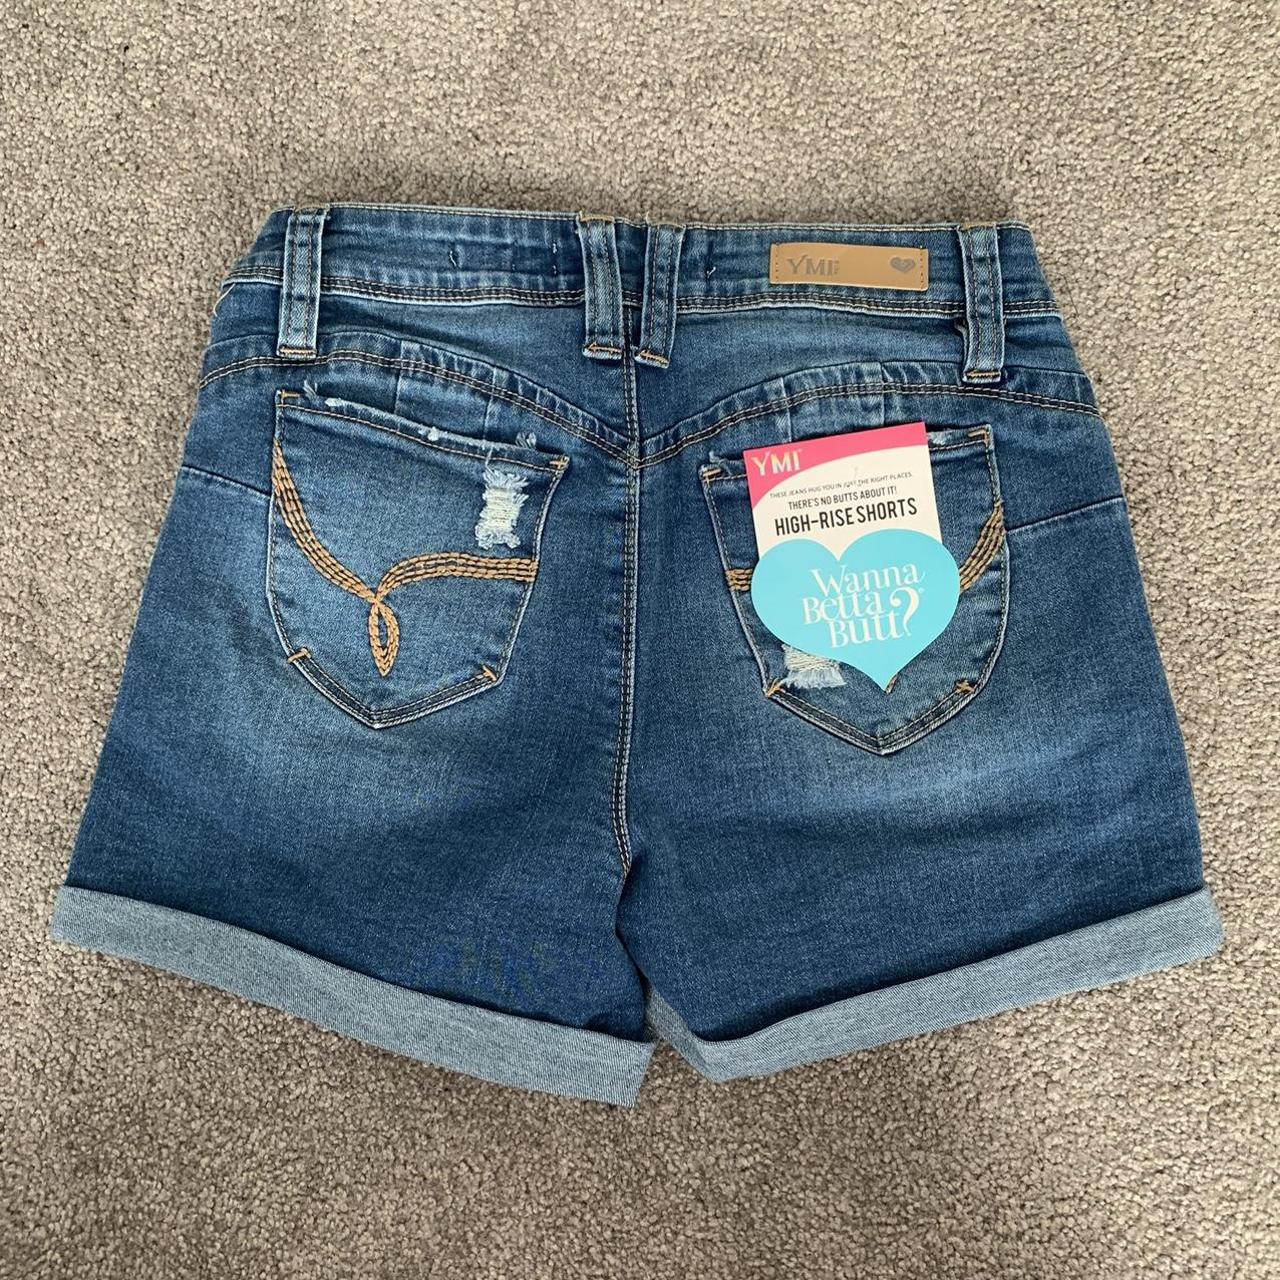 YMI JEANS blue jeans/jorts has three buttons and - Depop